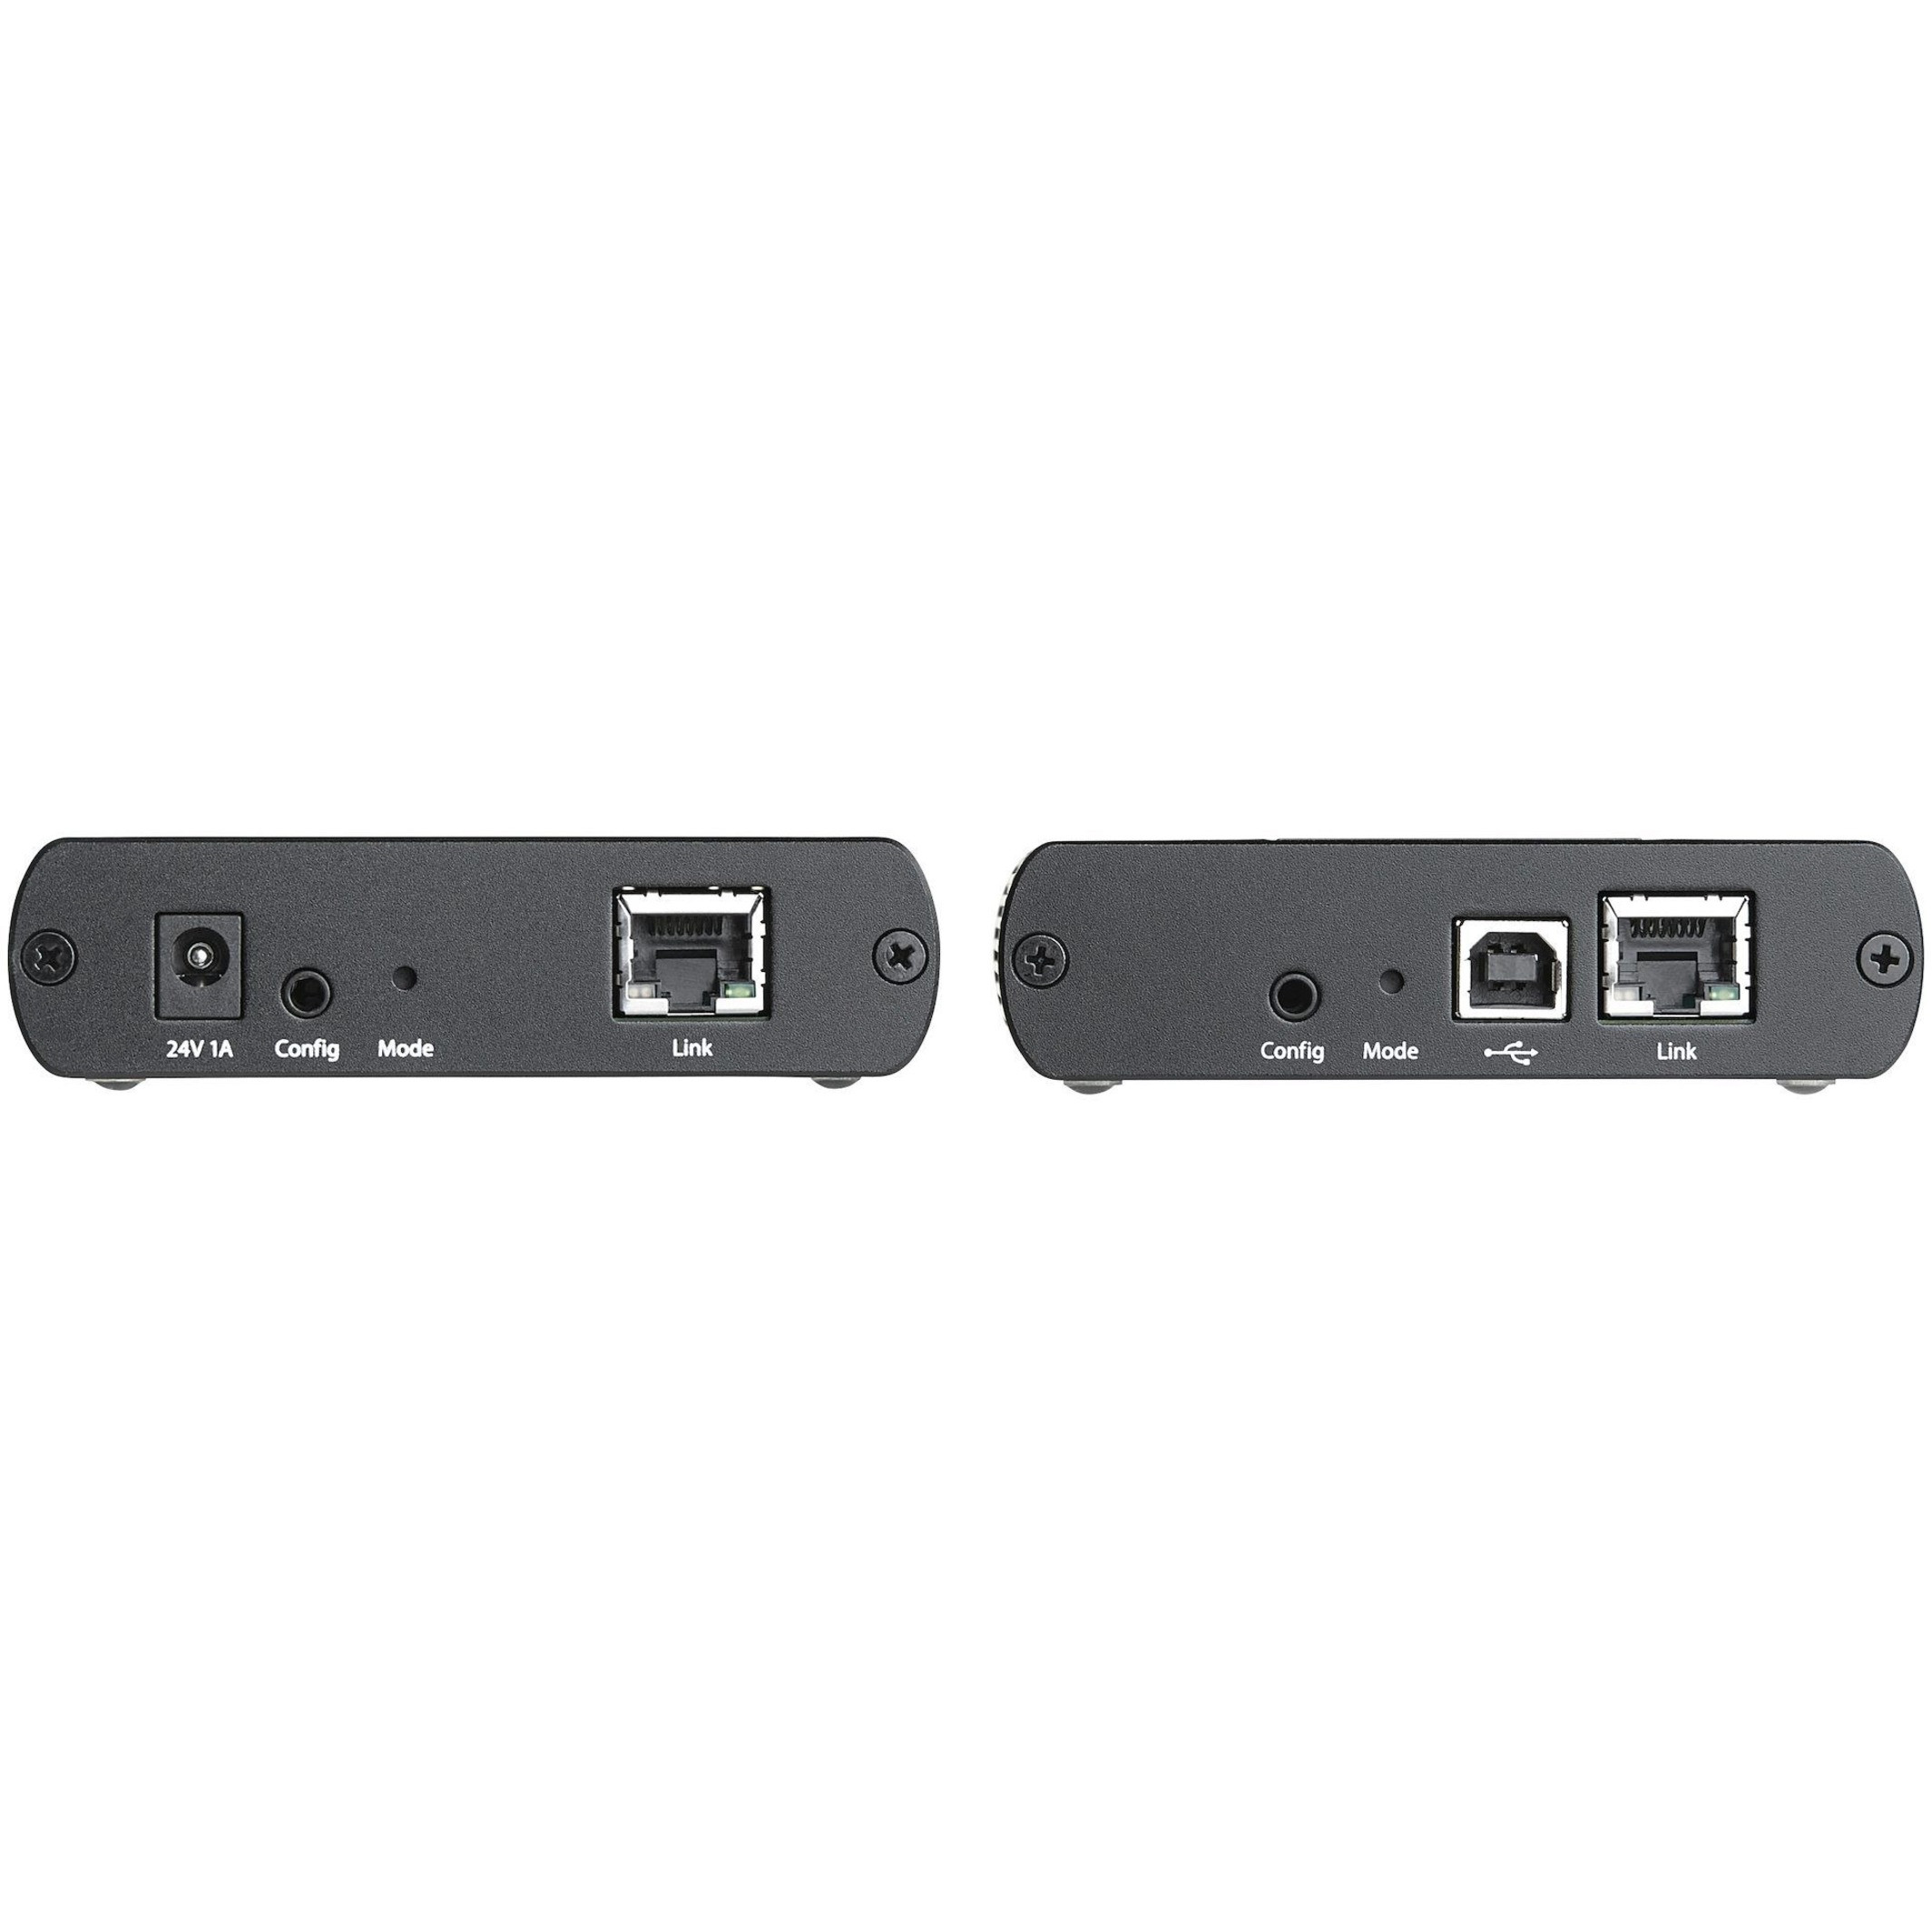 Startech .com 4 Port USB 2.0 over Ethernet/IP Network Hubup to 330ft (100m)USB over Gigabit or Cat5e/Cat6 Cable -... USB2G4LEXT2NA Corporate Armor